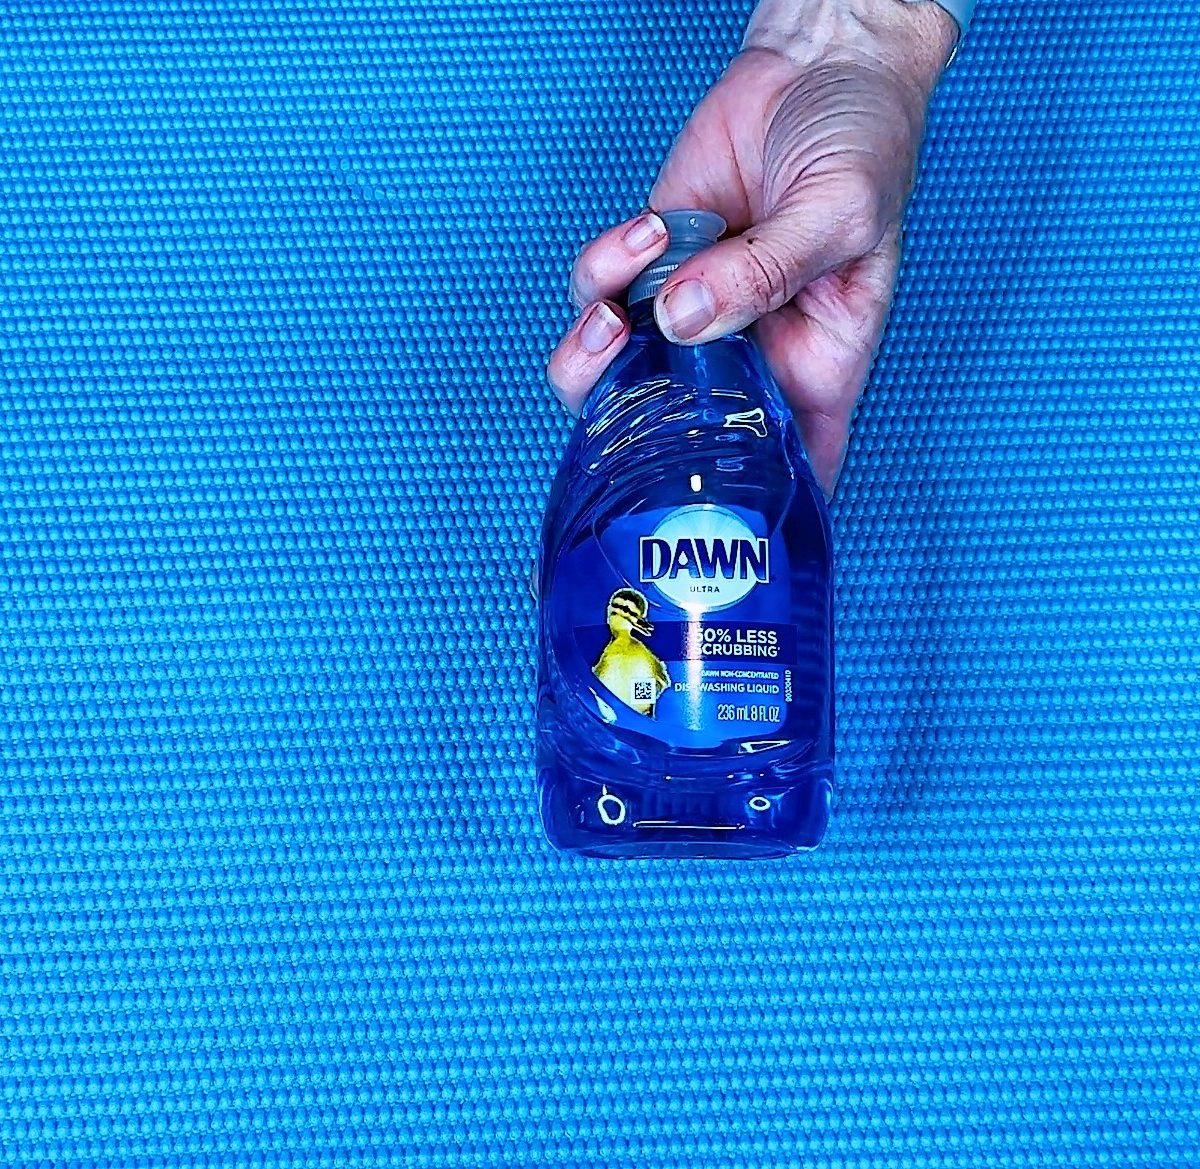 Avoid using a harsh or mild dish soap like Dawn, baking soda, bleach wipes (Clorox or Lysol wipes, Wet Wipes, etc), white vinegar or hydrogen peroxide on your Lululemon or regular yoga mats. These substances can damage the integrity and components of your mat.